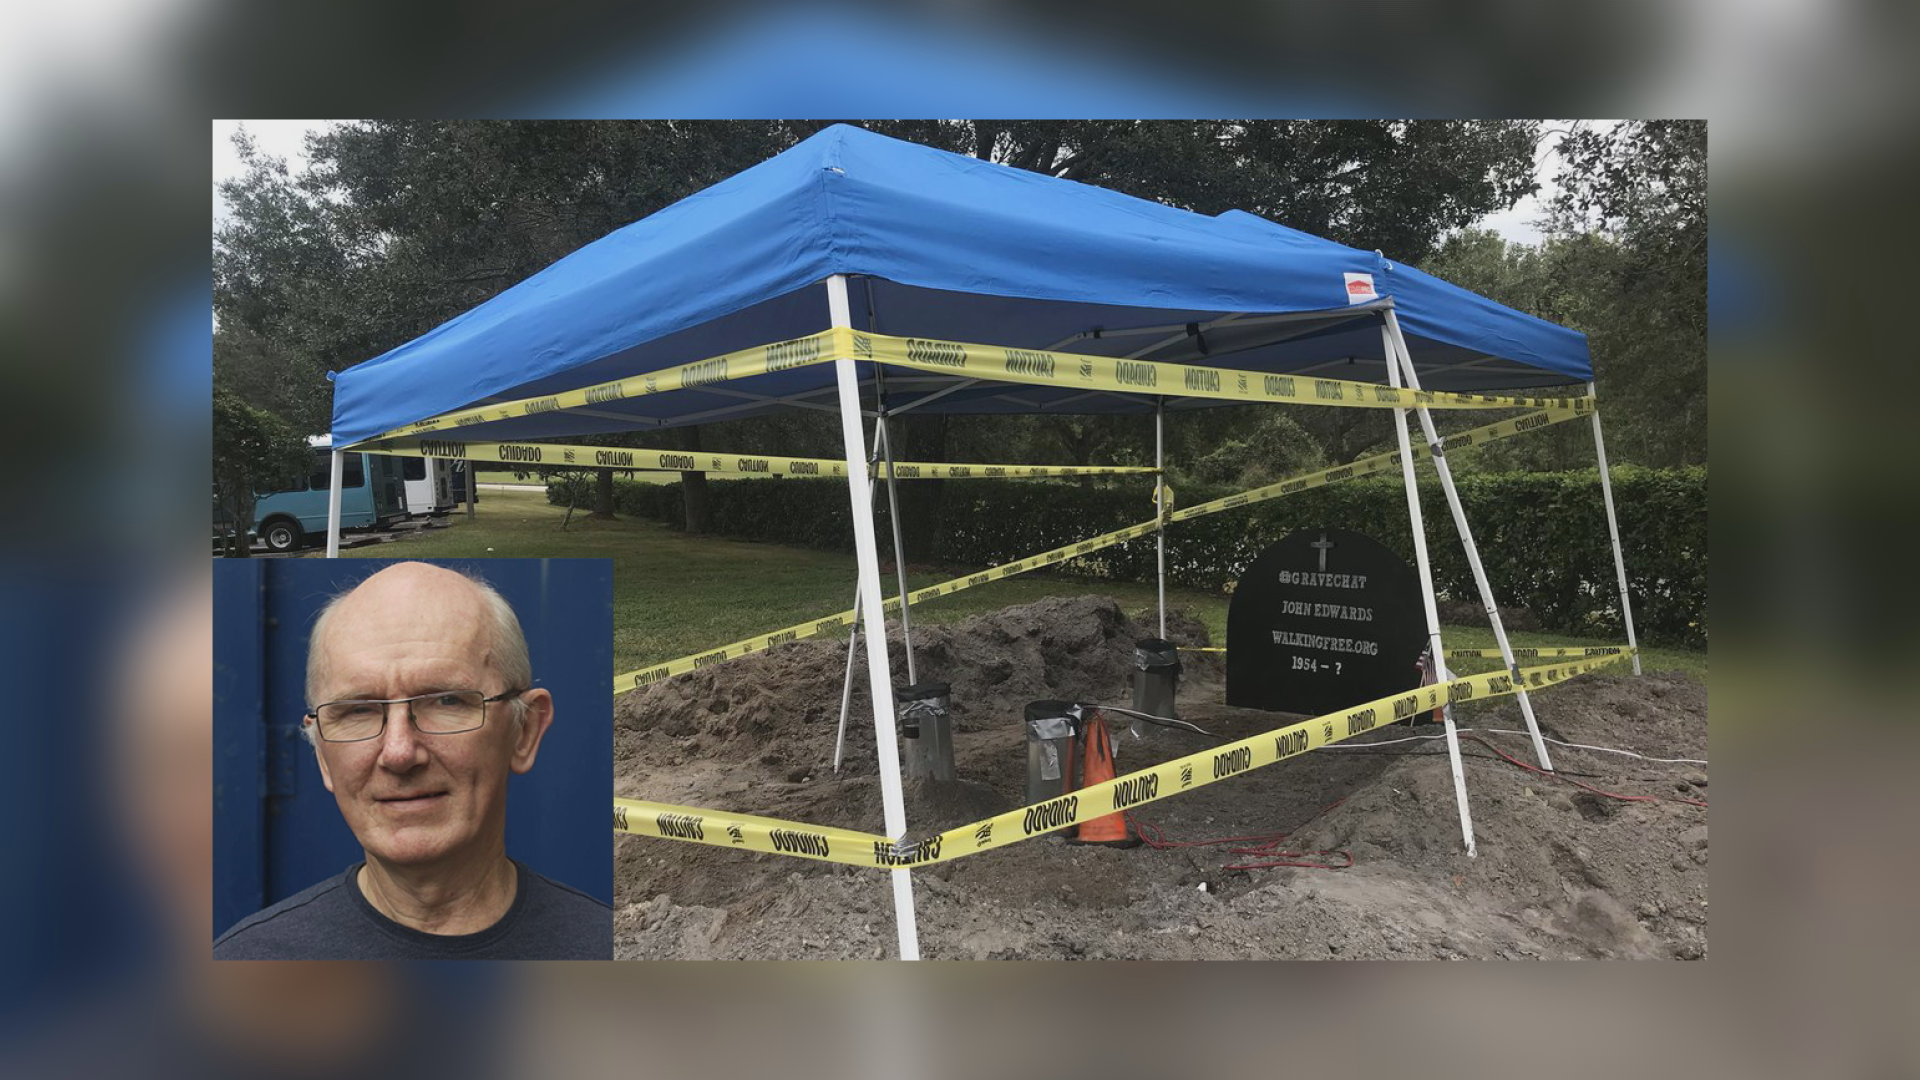 Former addict buries himself underground, brings awareness to nationwide opioid epidemic